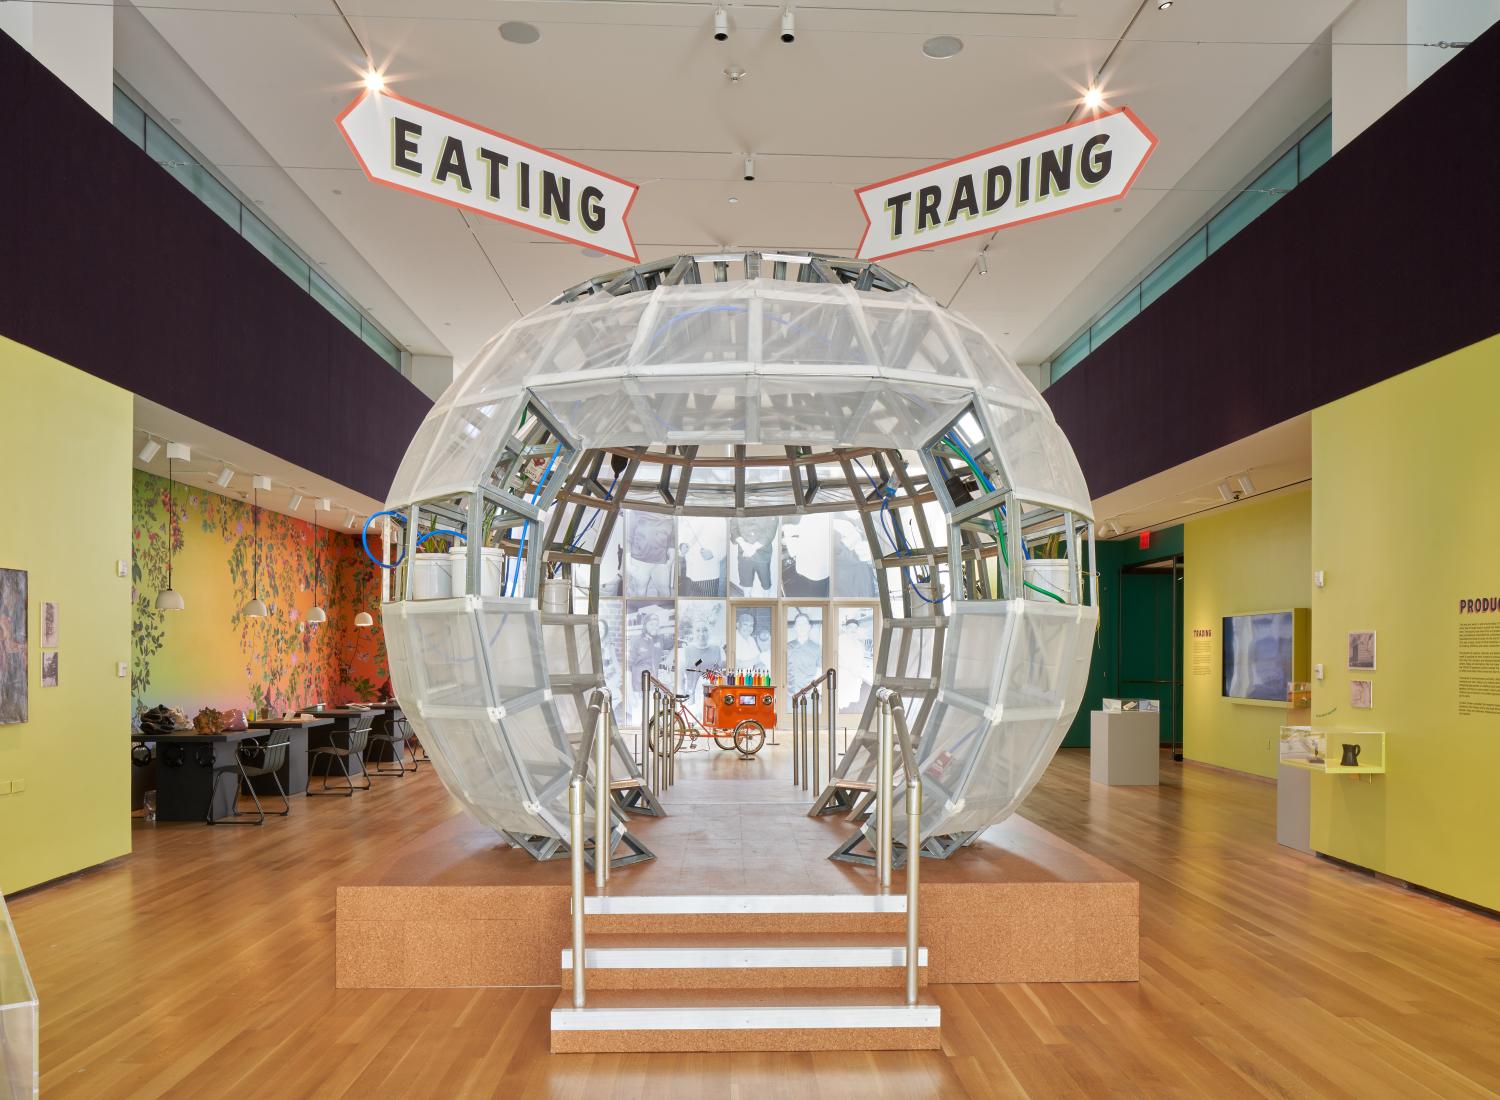 A large clear sphere, similar to a snowglobe sits at the center of the image with signs that read 'eating' and 'trading' above it. 